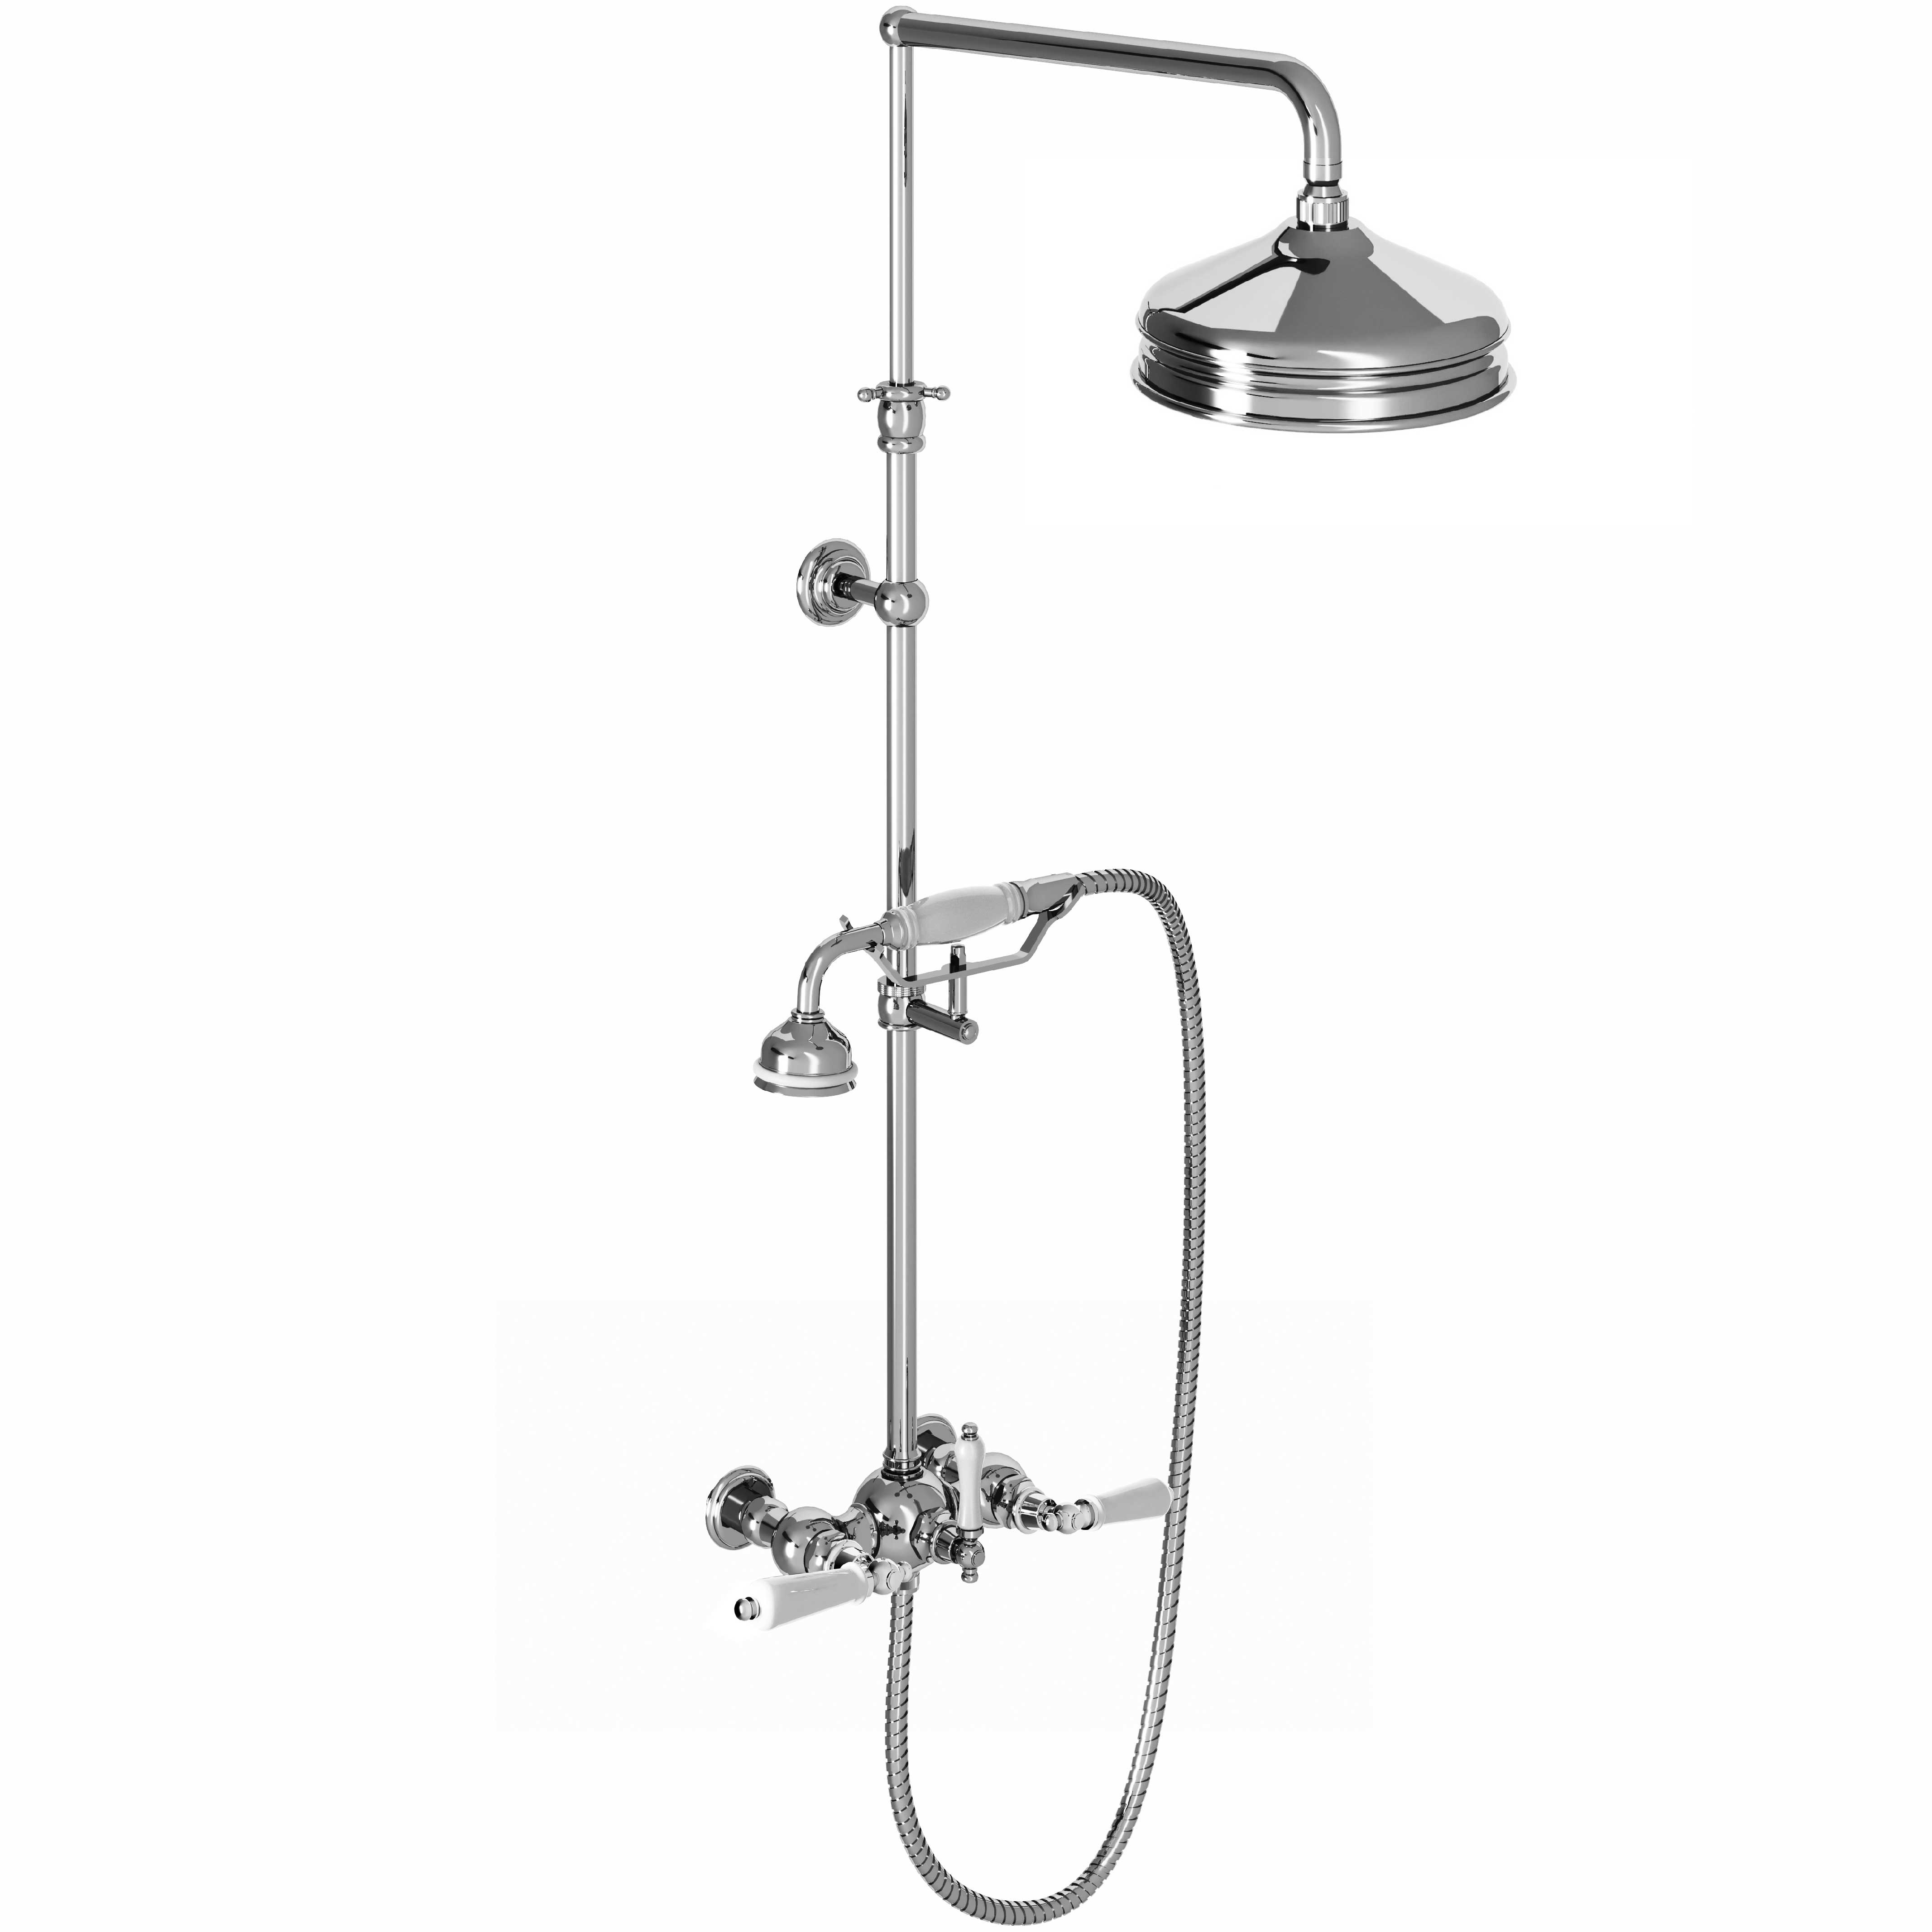 M04-2204 Shower mixer with column, anti-scaling